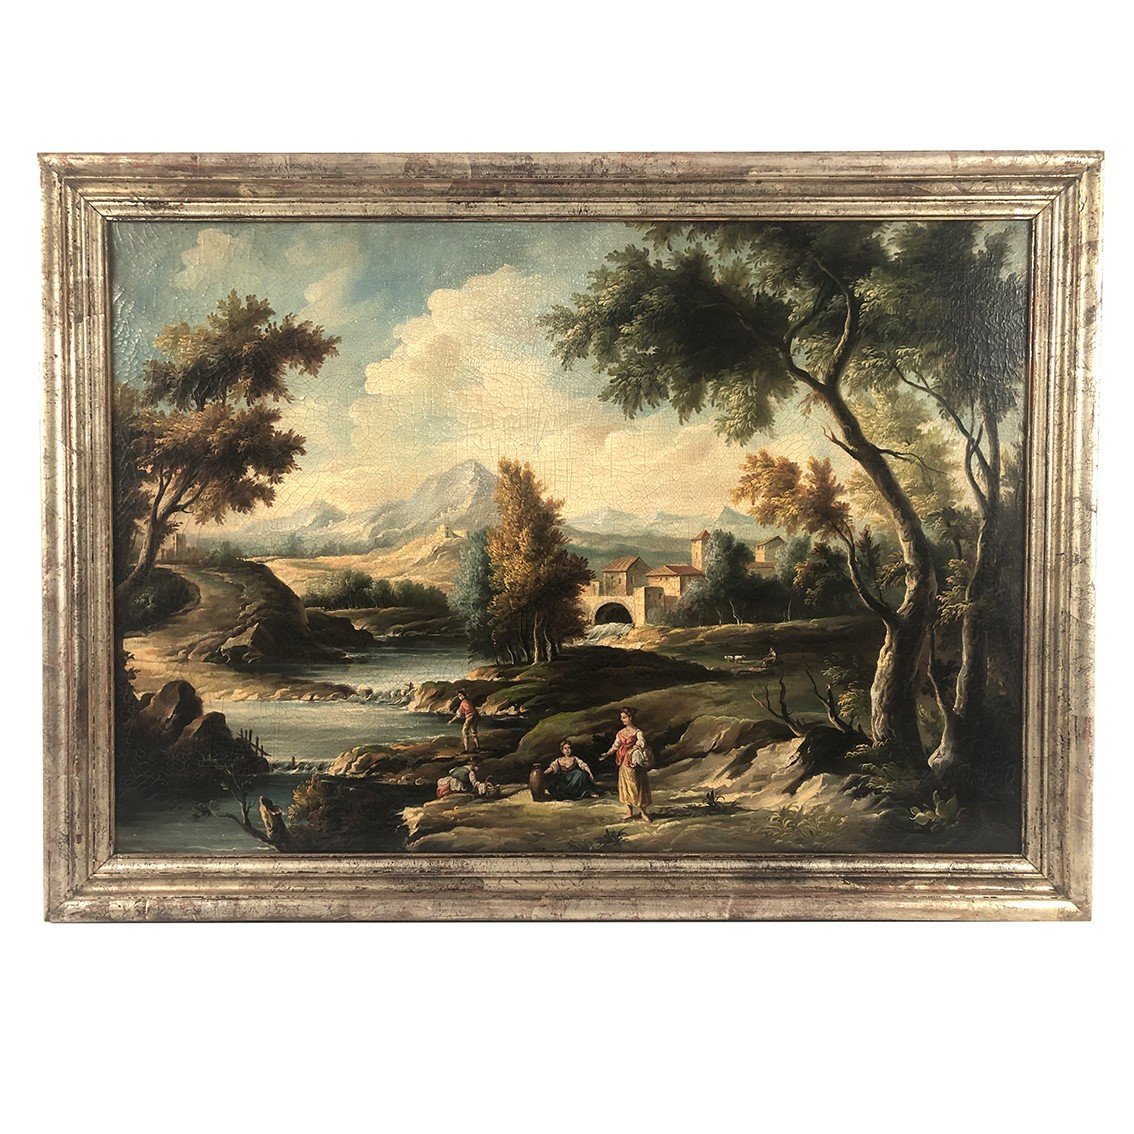 Italian School, Large Oil On Canvas In The Taste Of The 18th Century. Animated Landscape